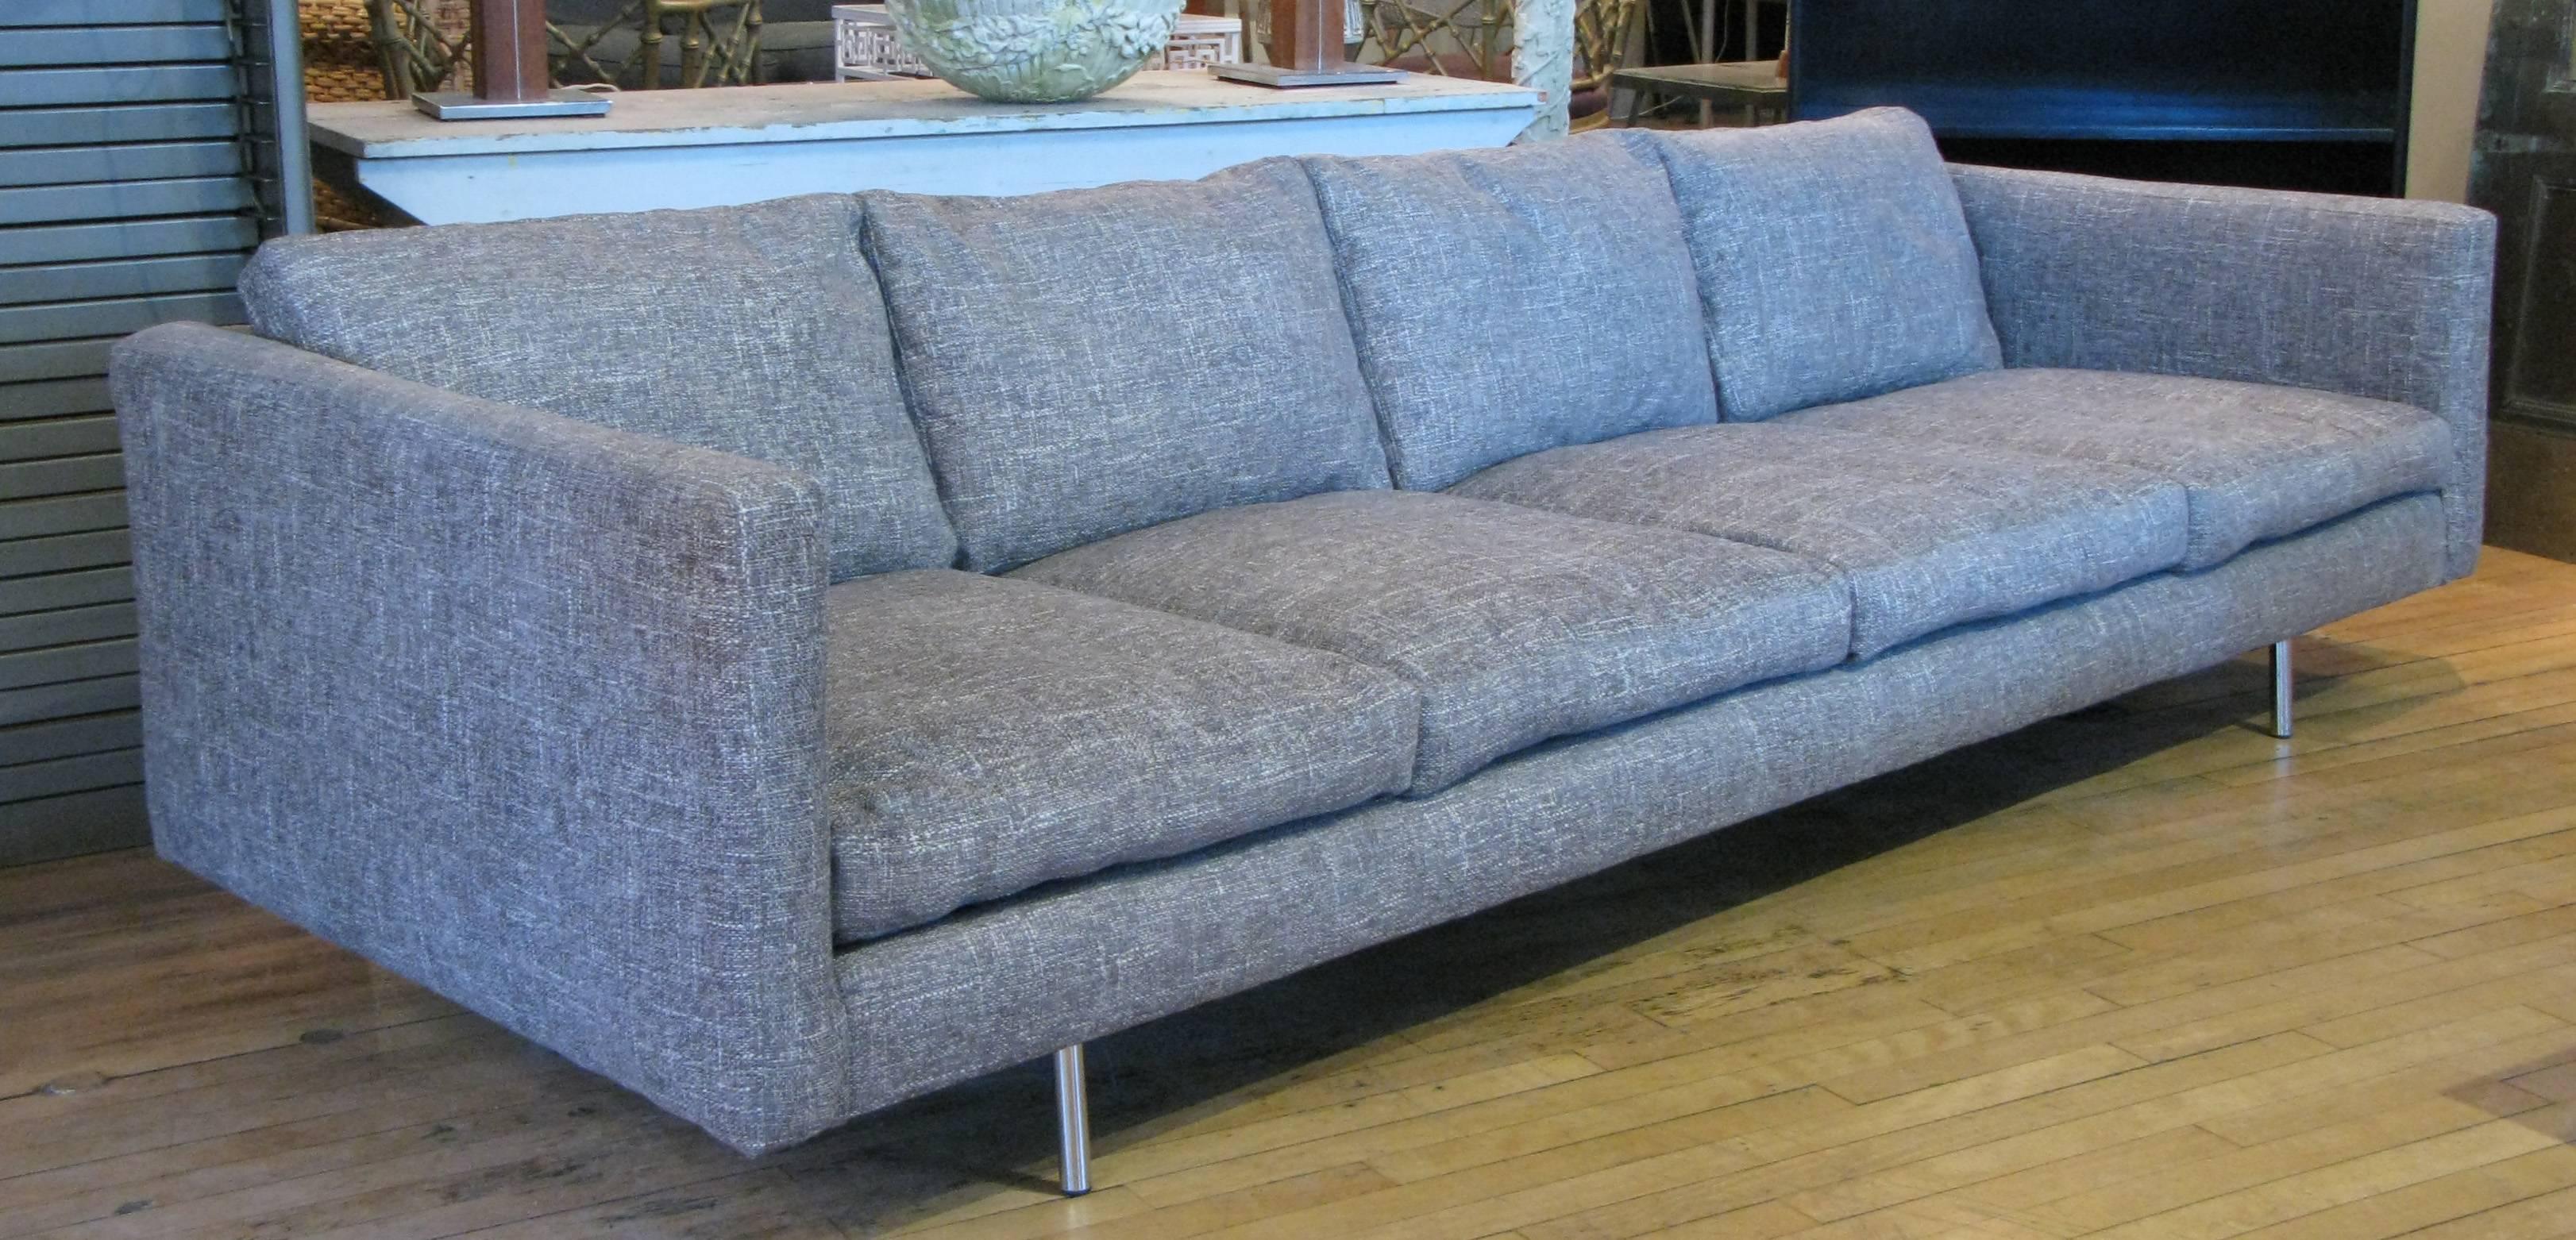 A very nice 1950s long four seat tuxedo sofa, with chrome legs. Reupholstered in a grey and cream woven textured fabric.